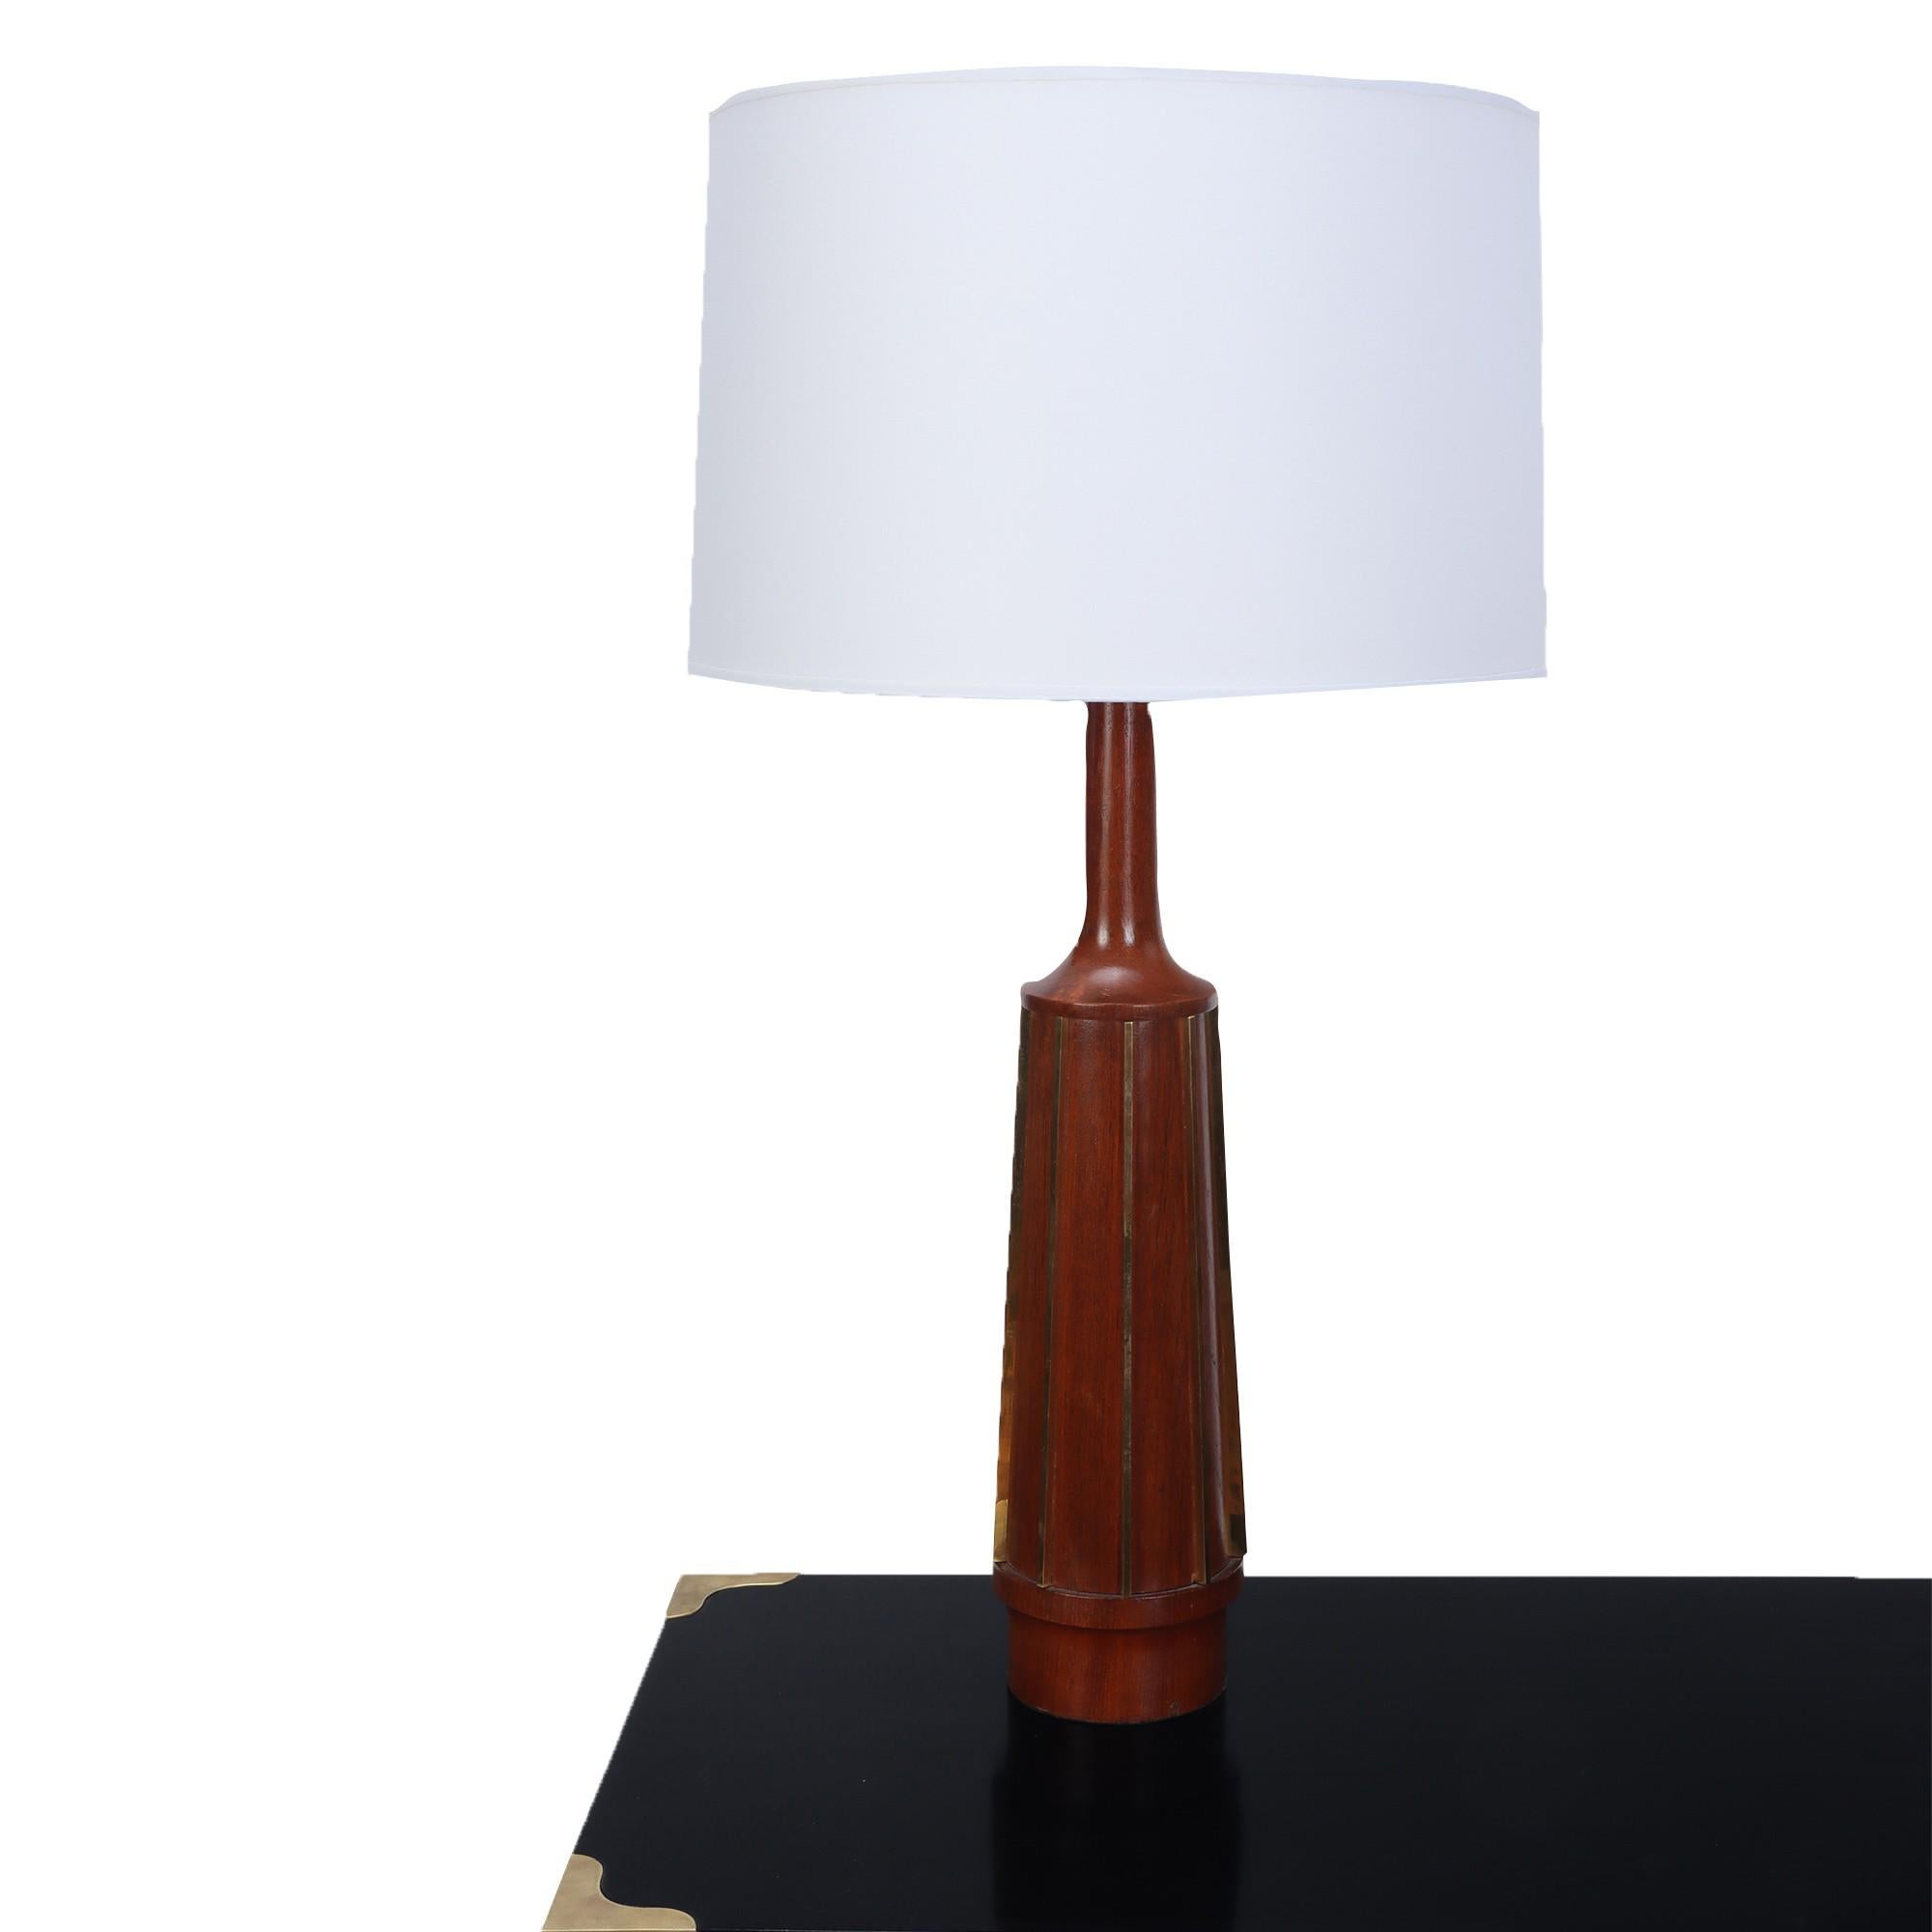 Mid-20th Century Pair of Mid Century Modern Table Lamps by G. Thurston, circa 1950 For Sale